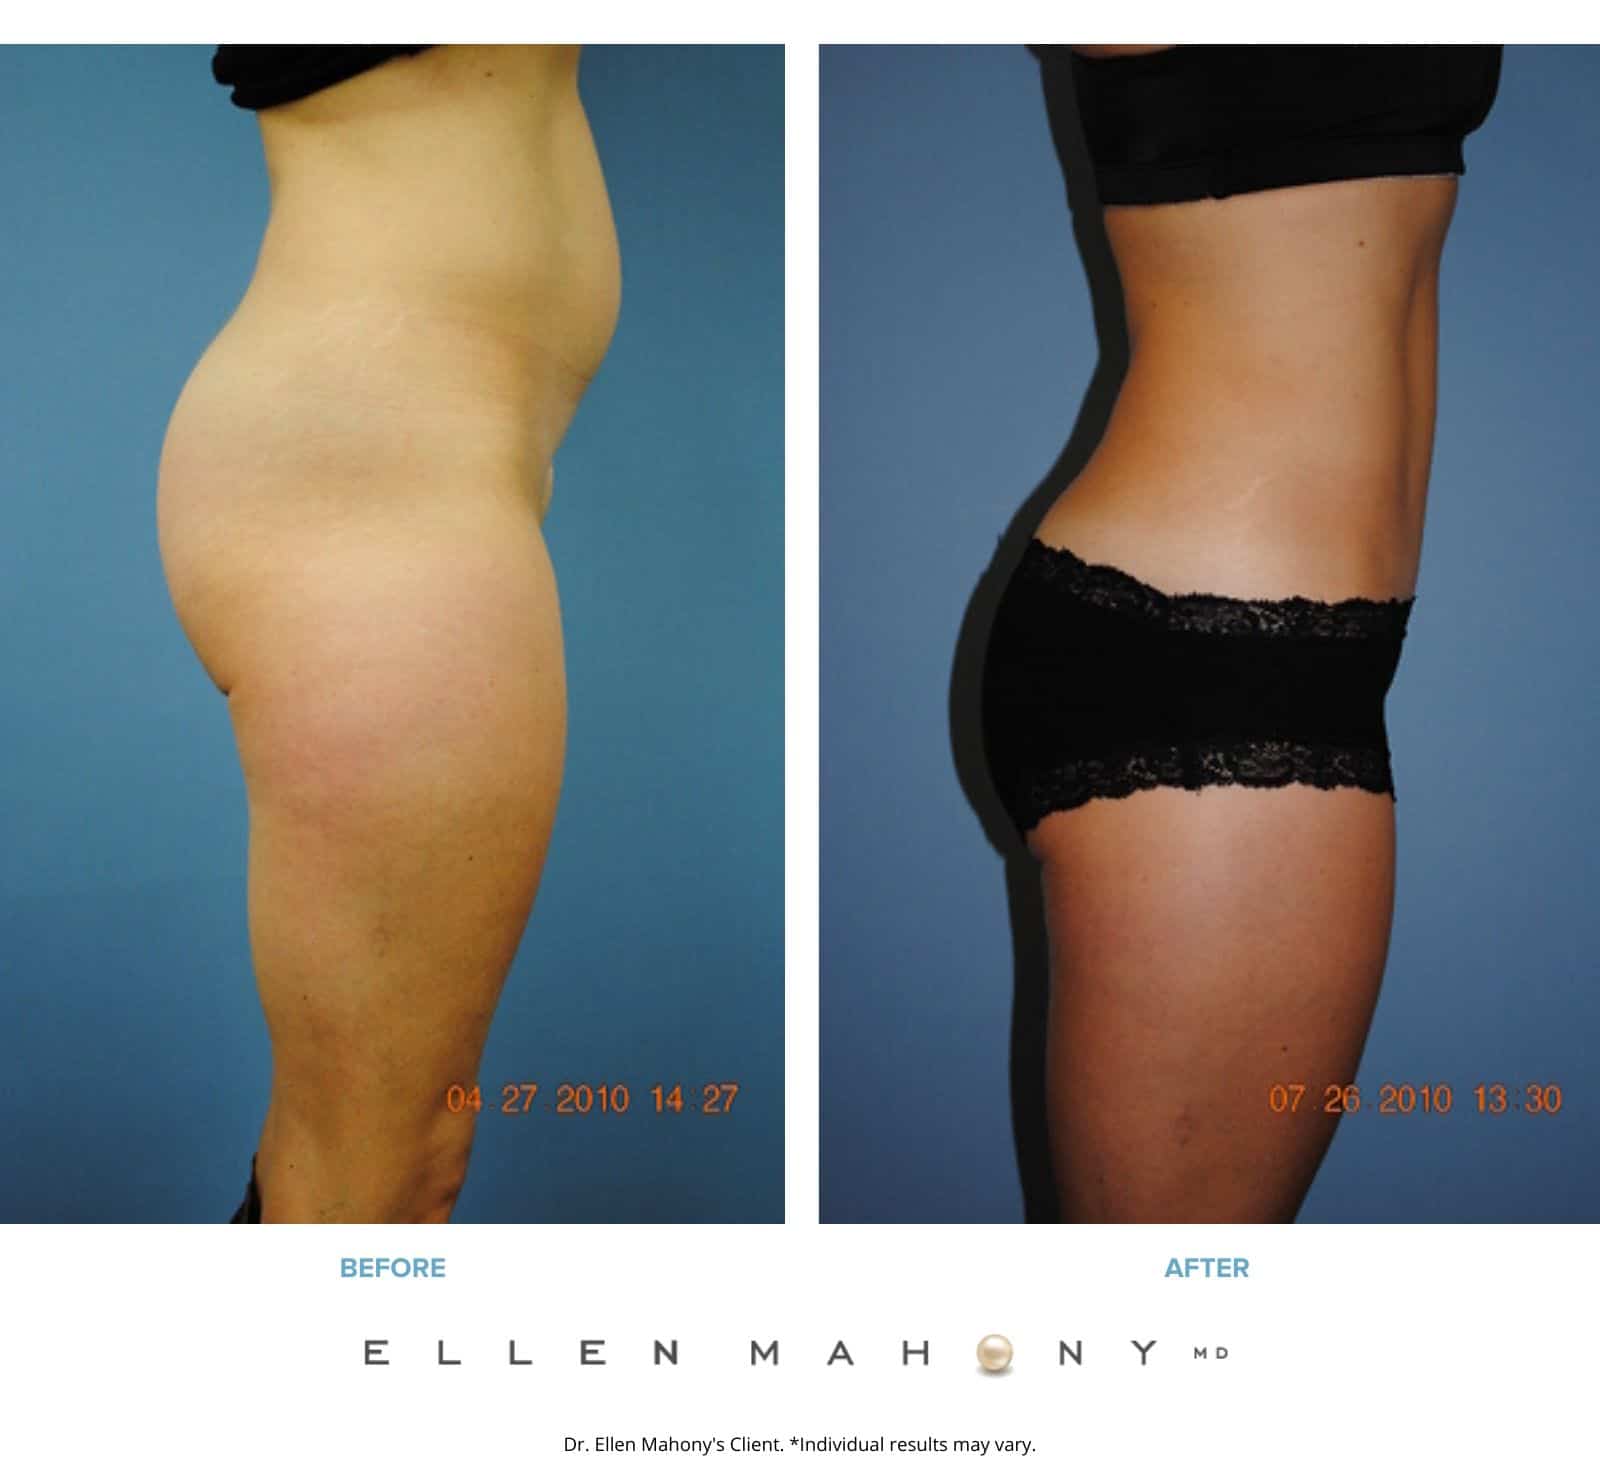 Mini Tuck And Tummy Tuck (abdominoplasty) Before & After Photos Patient 07